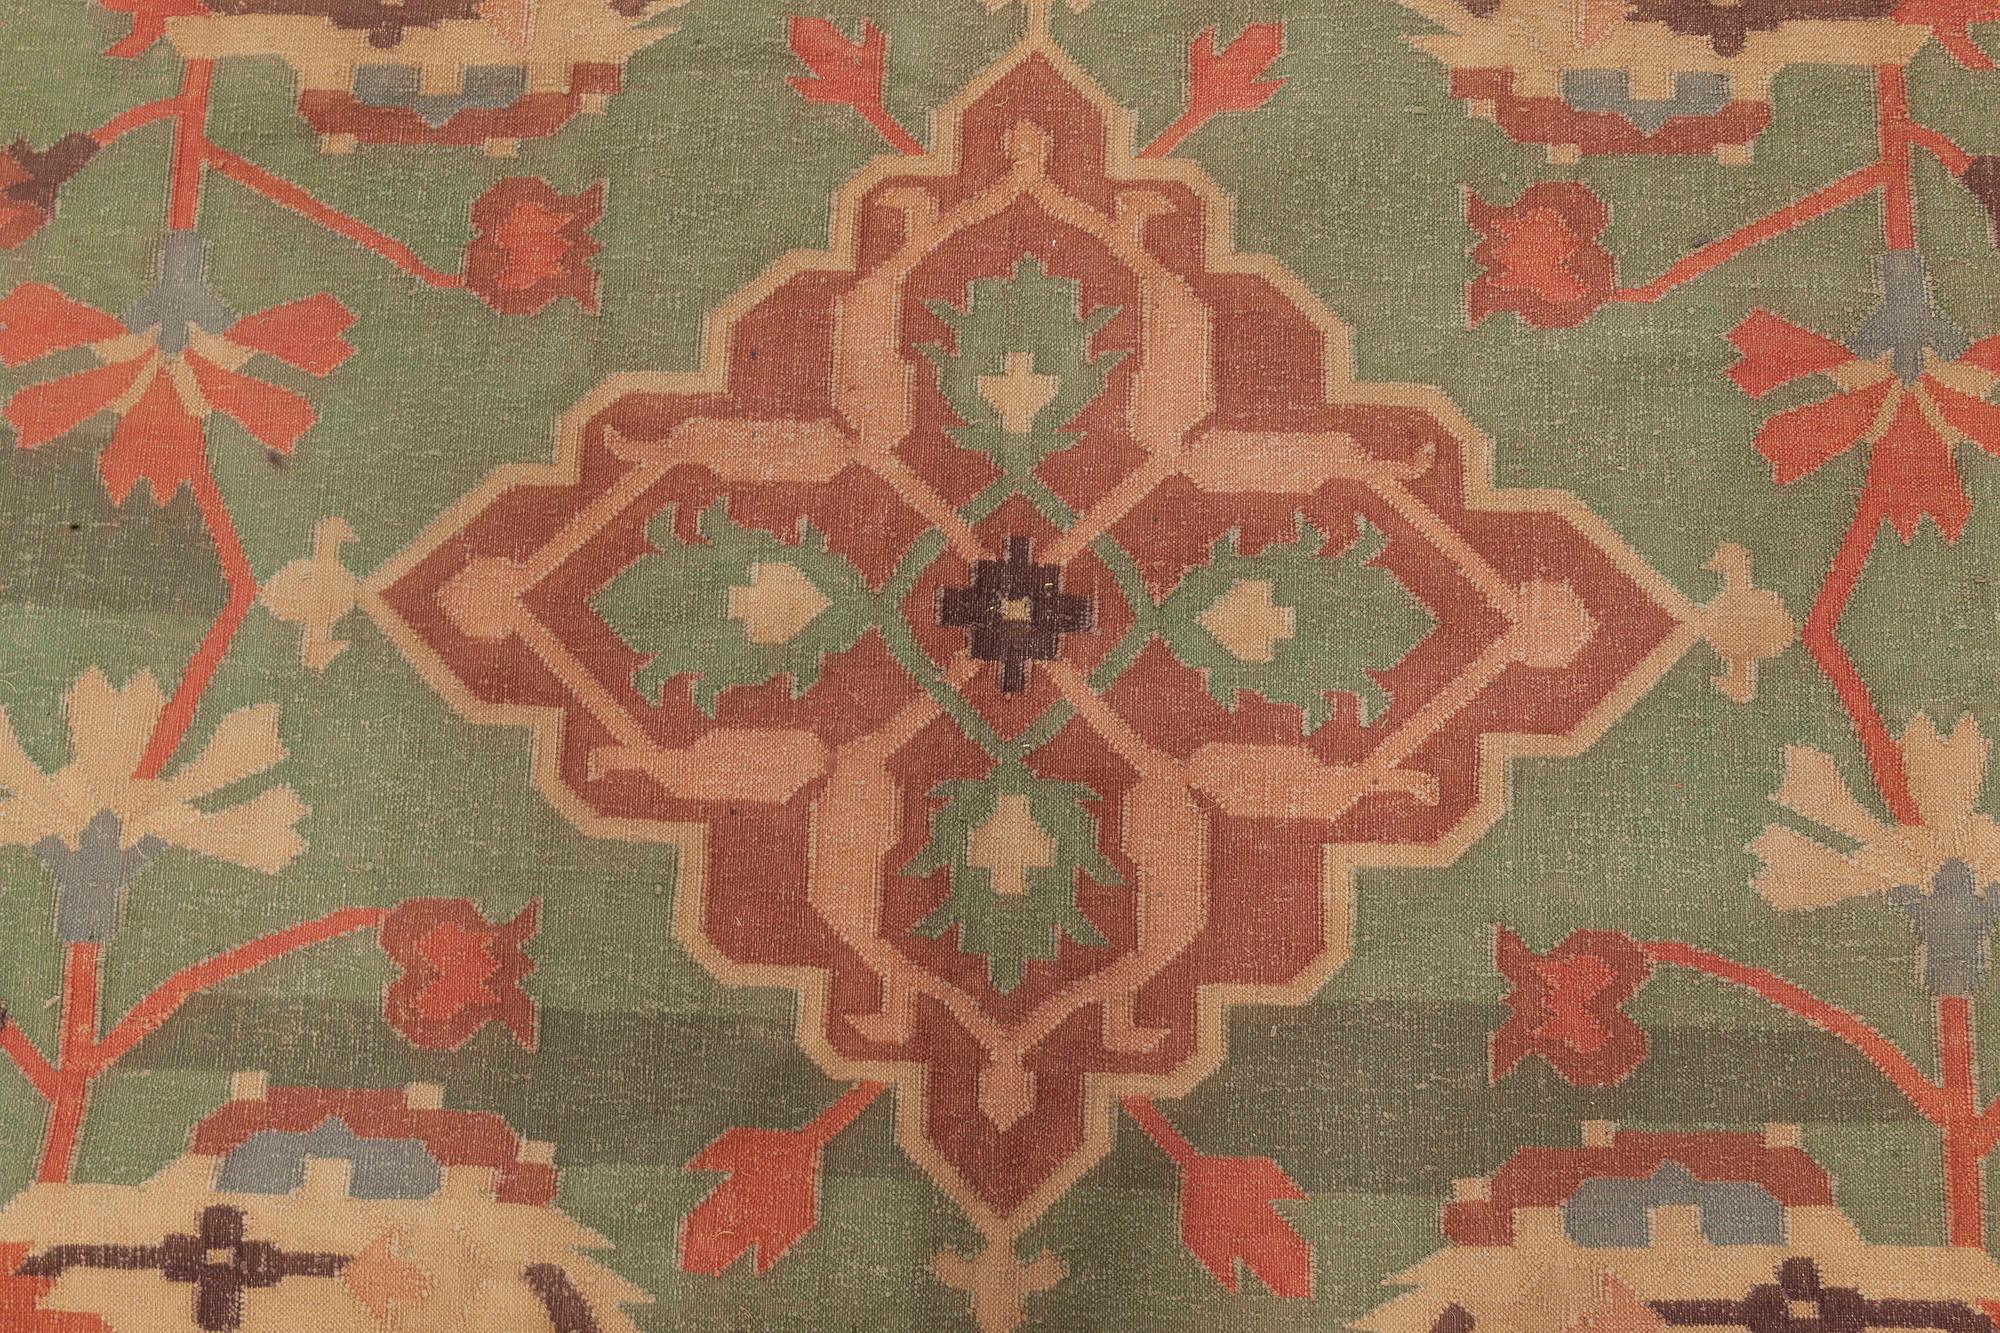 Mid-20th Century Indian Dhurrie Flat-Weave Rug
Size: 8'4